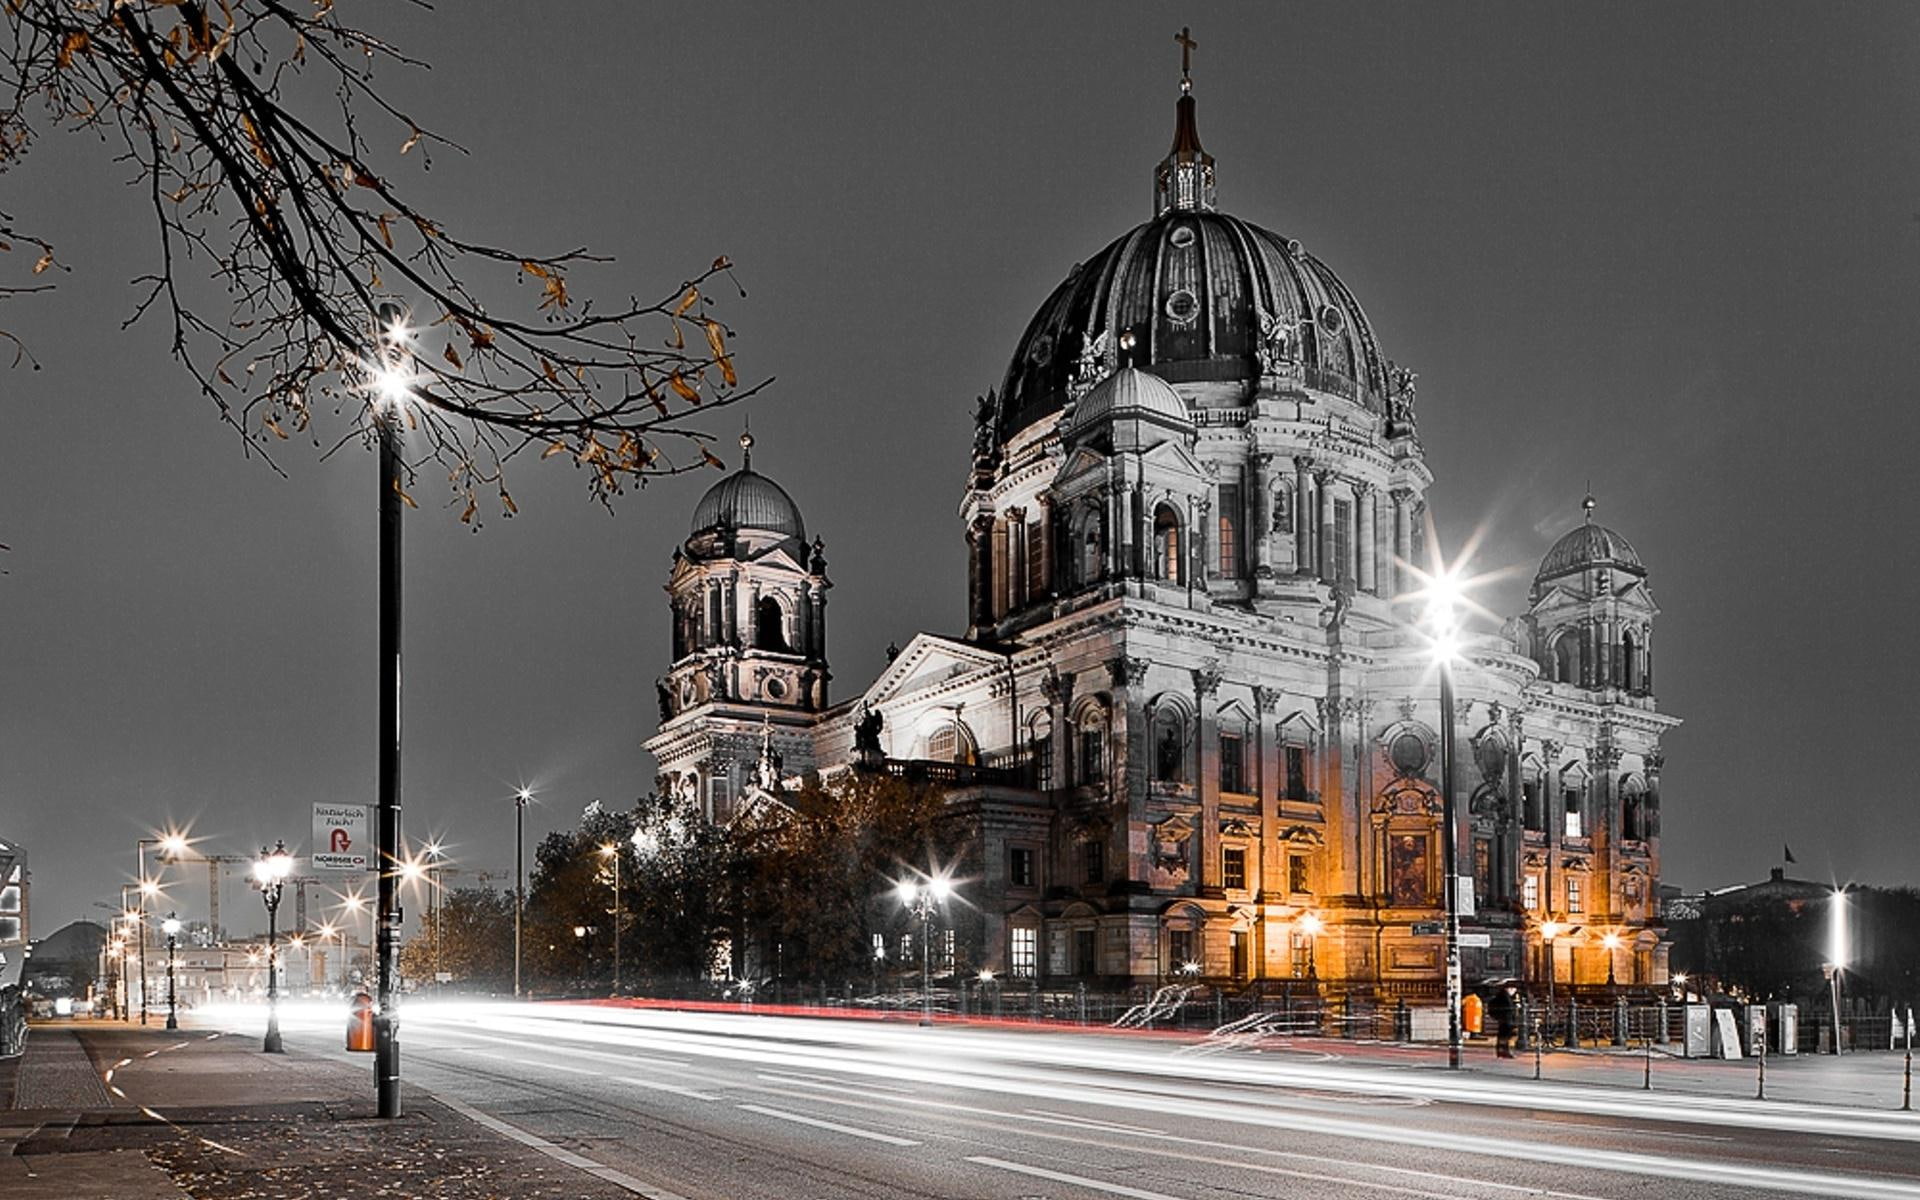 Berlin, Germany, berlin cathedral during nighttime poster, world